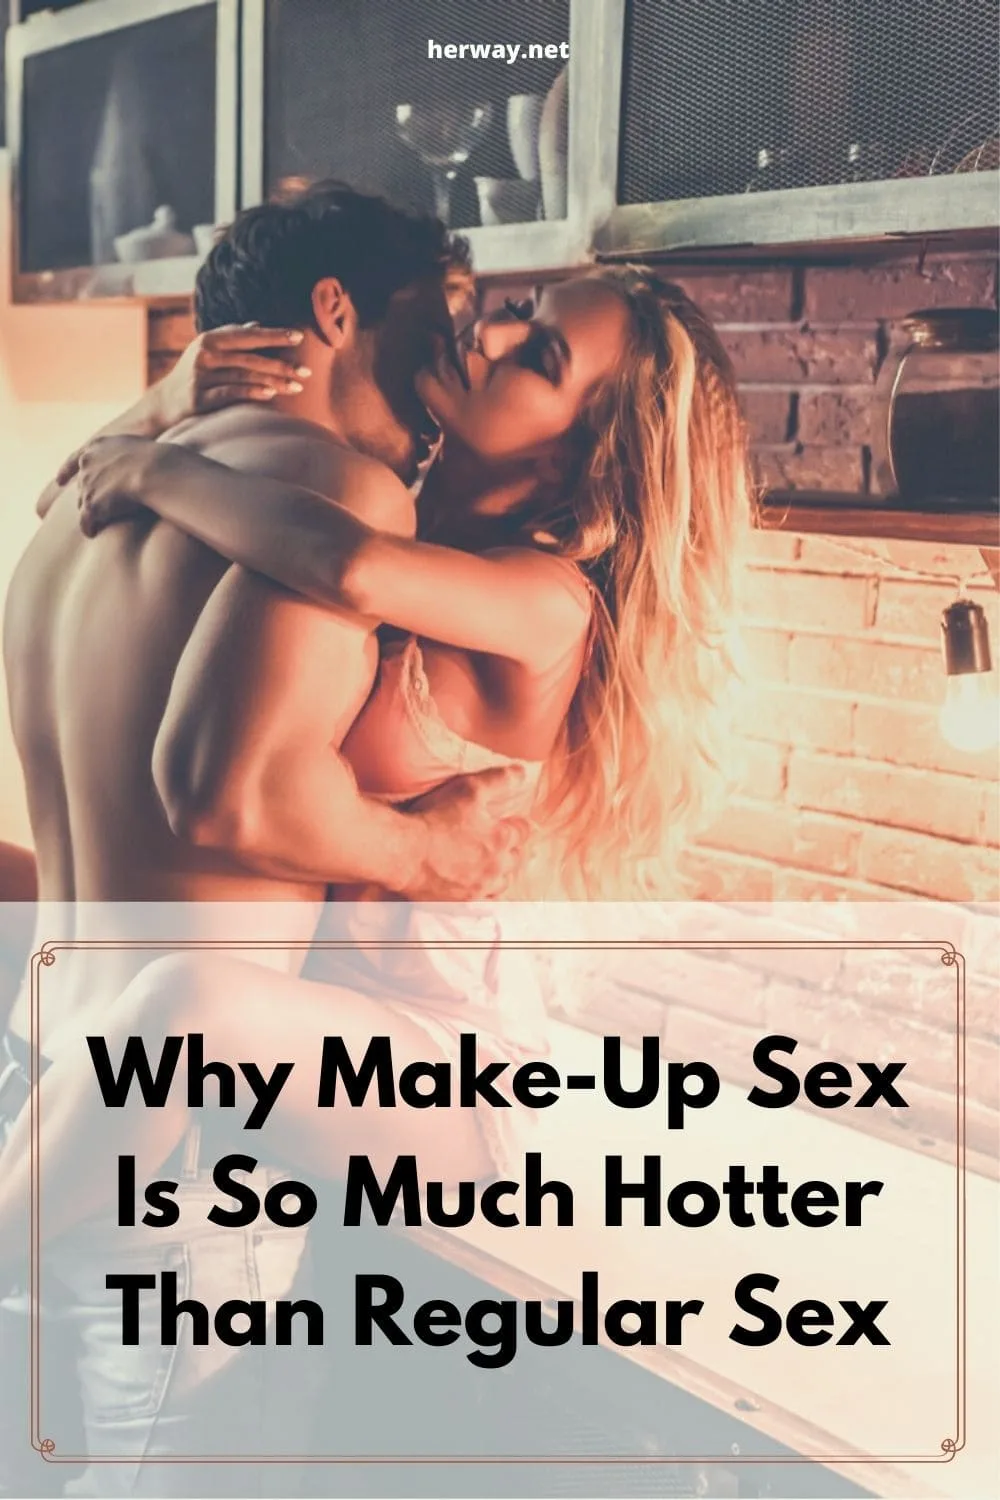 Why Make-Up Sex Is So Much Hotter Than Regular Sex